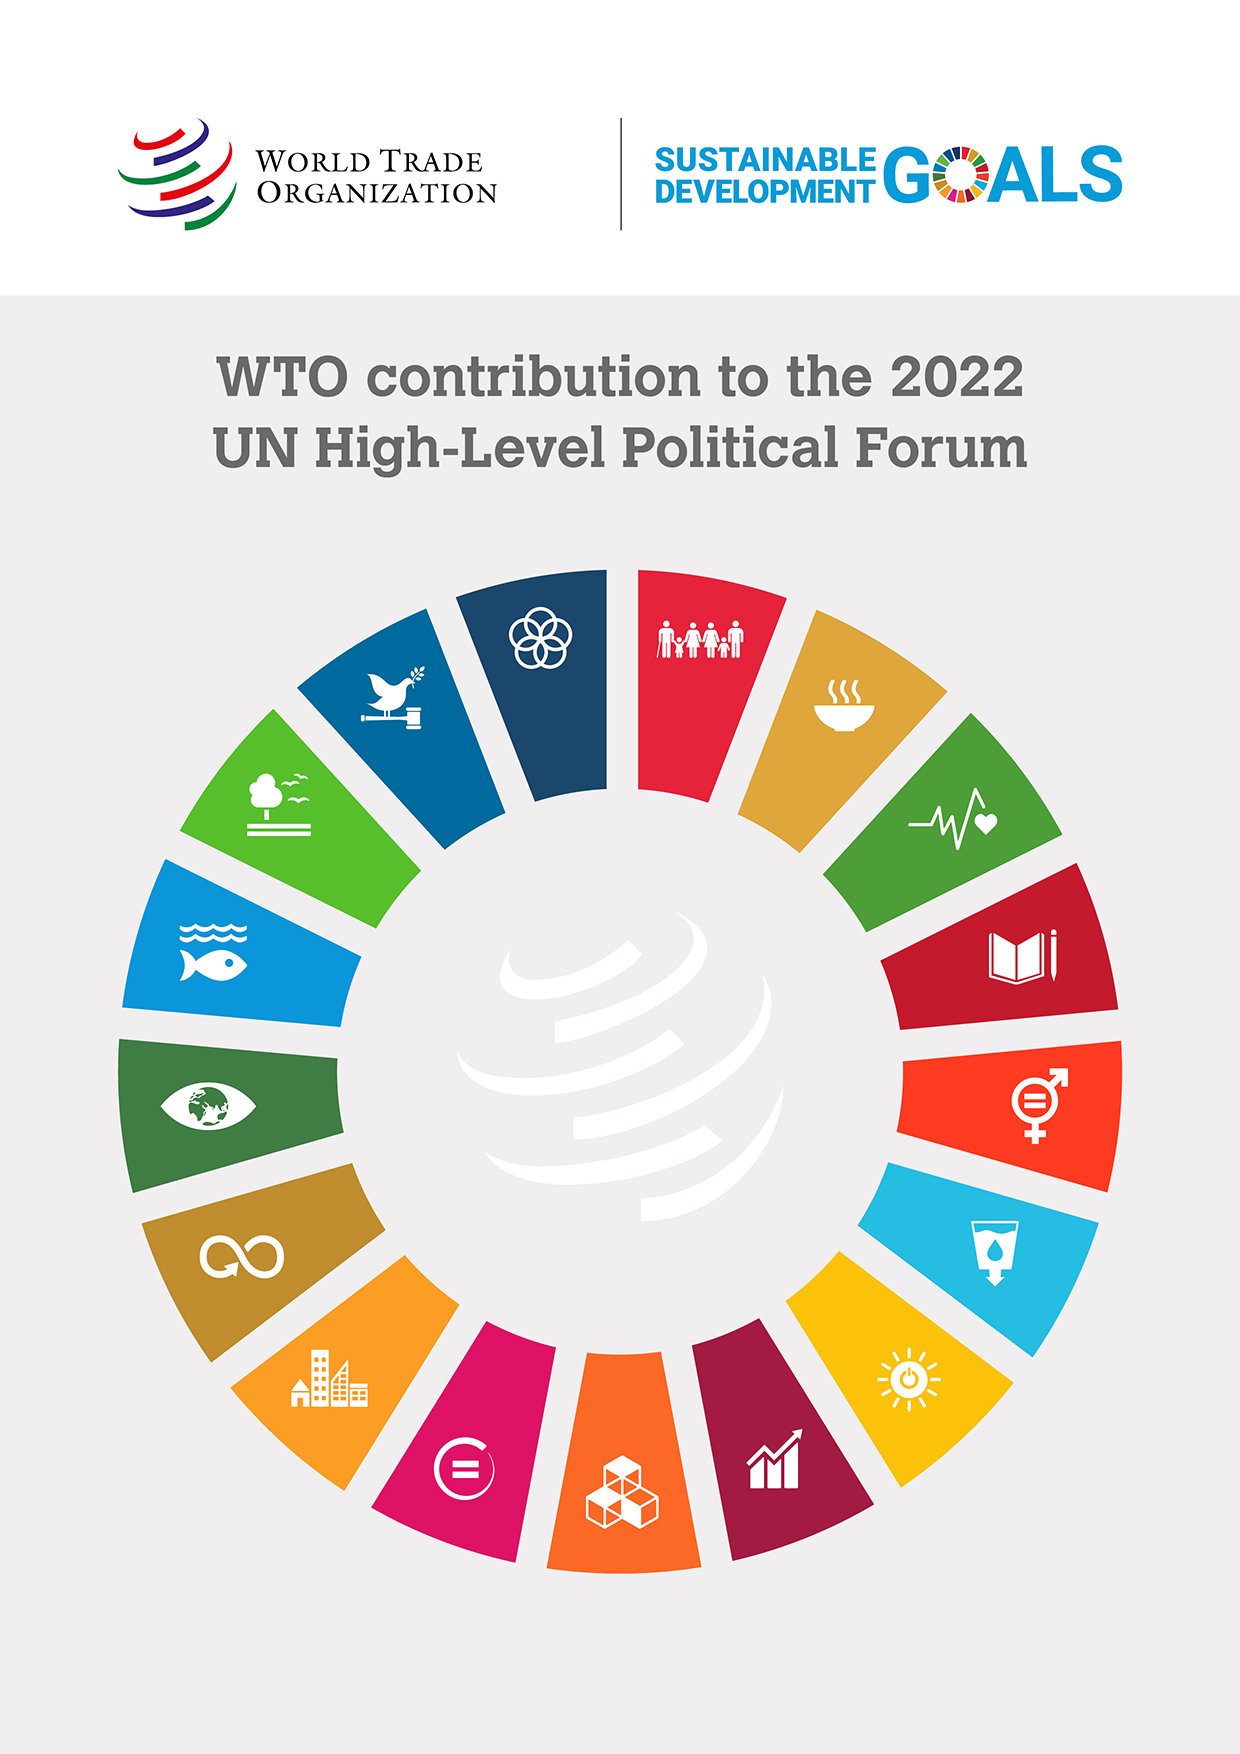 image of WTO contribution to the 2022 UN High-Level Political Forum